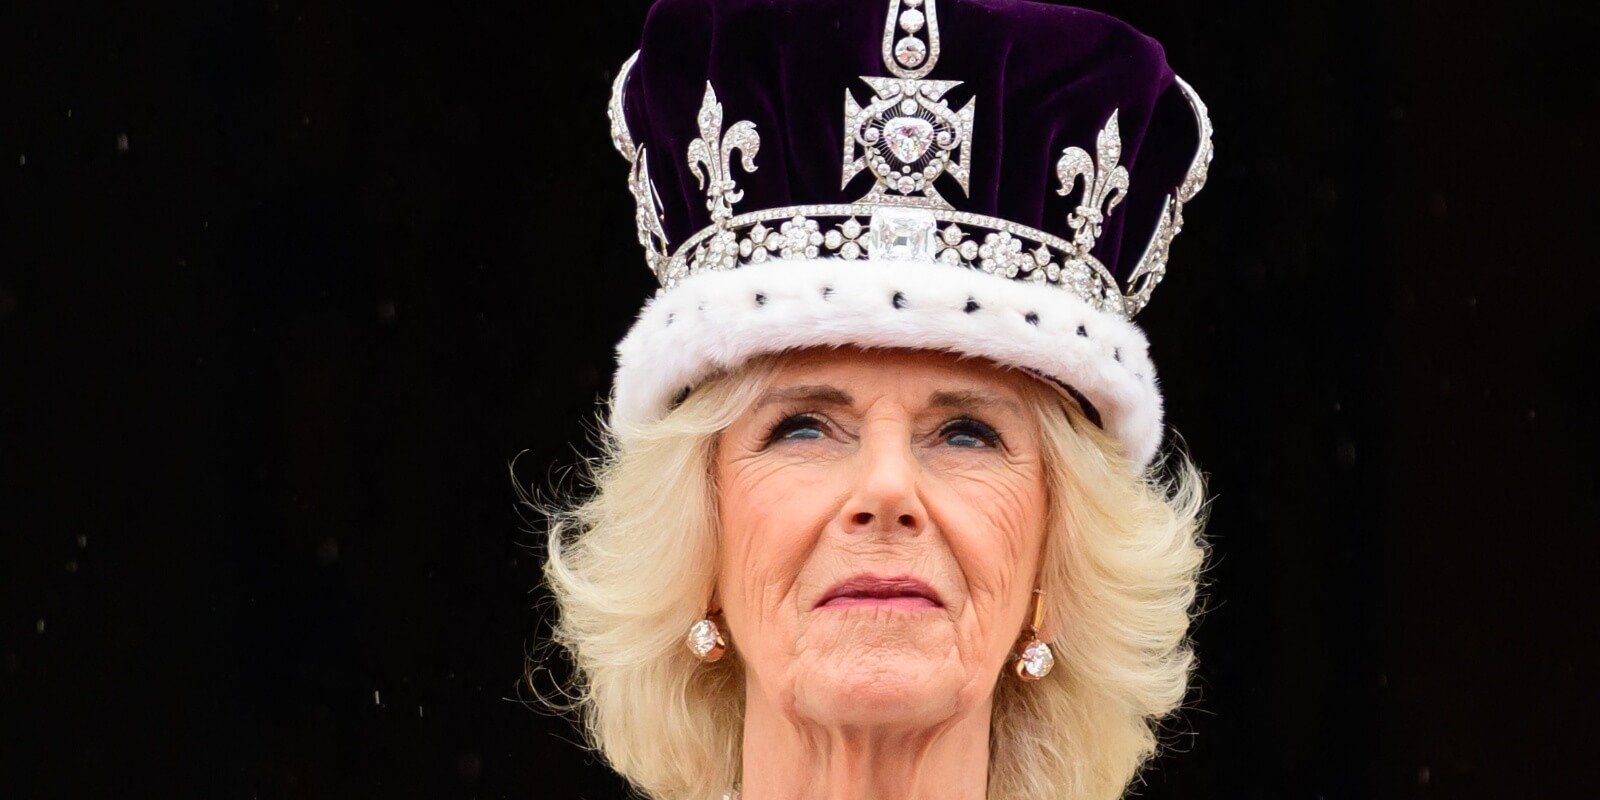 Camilla Parker Bowles narrowly escaped an issue with her crown during her coronation.